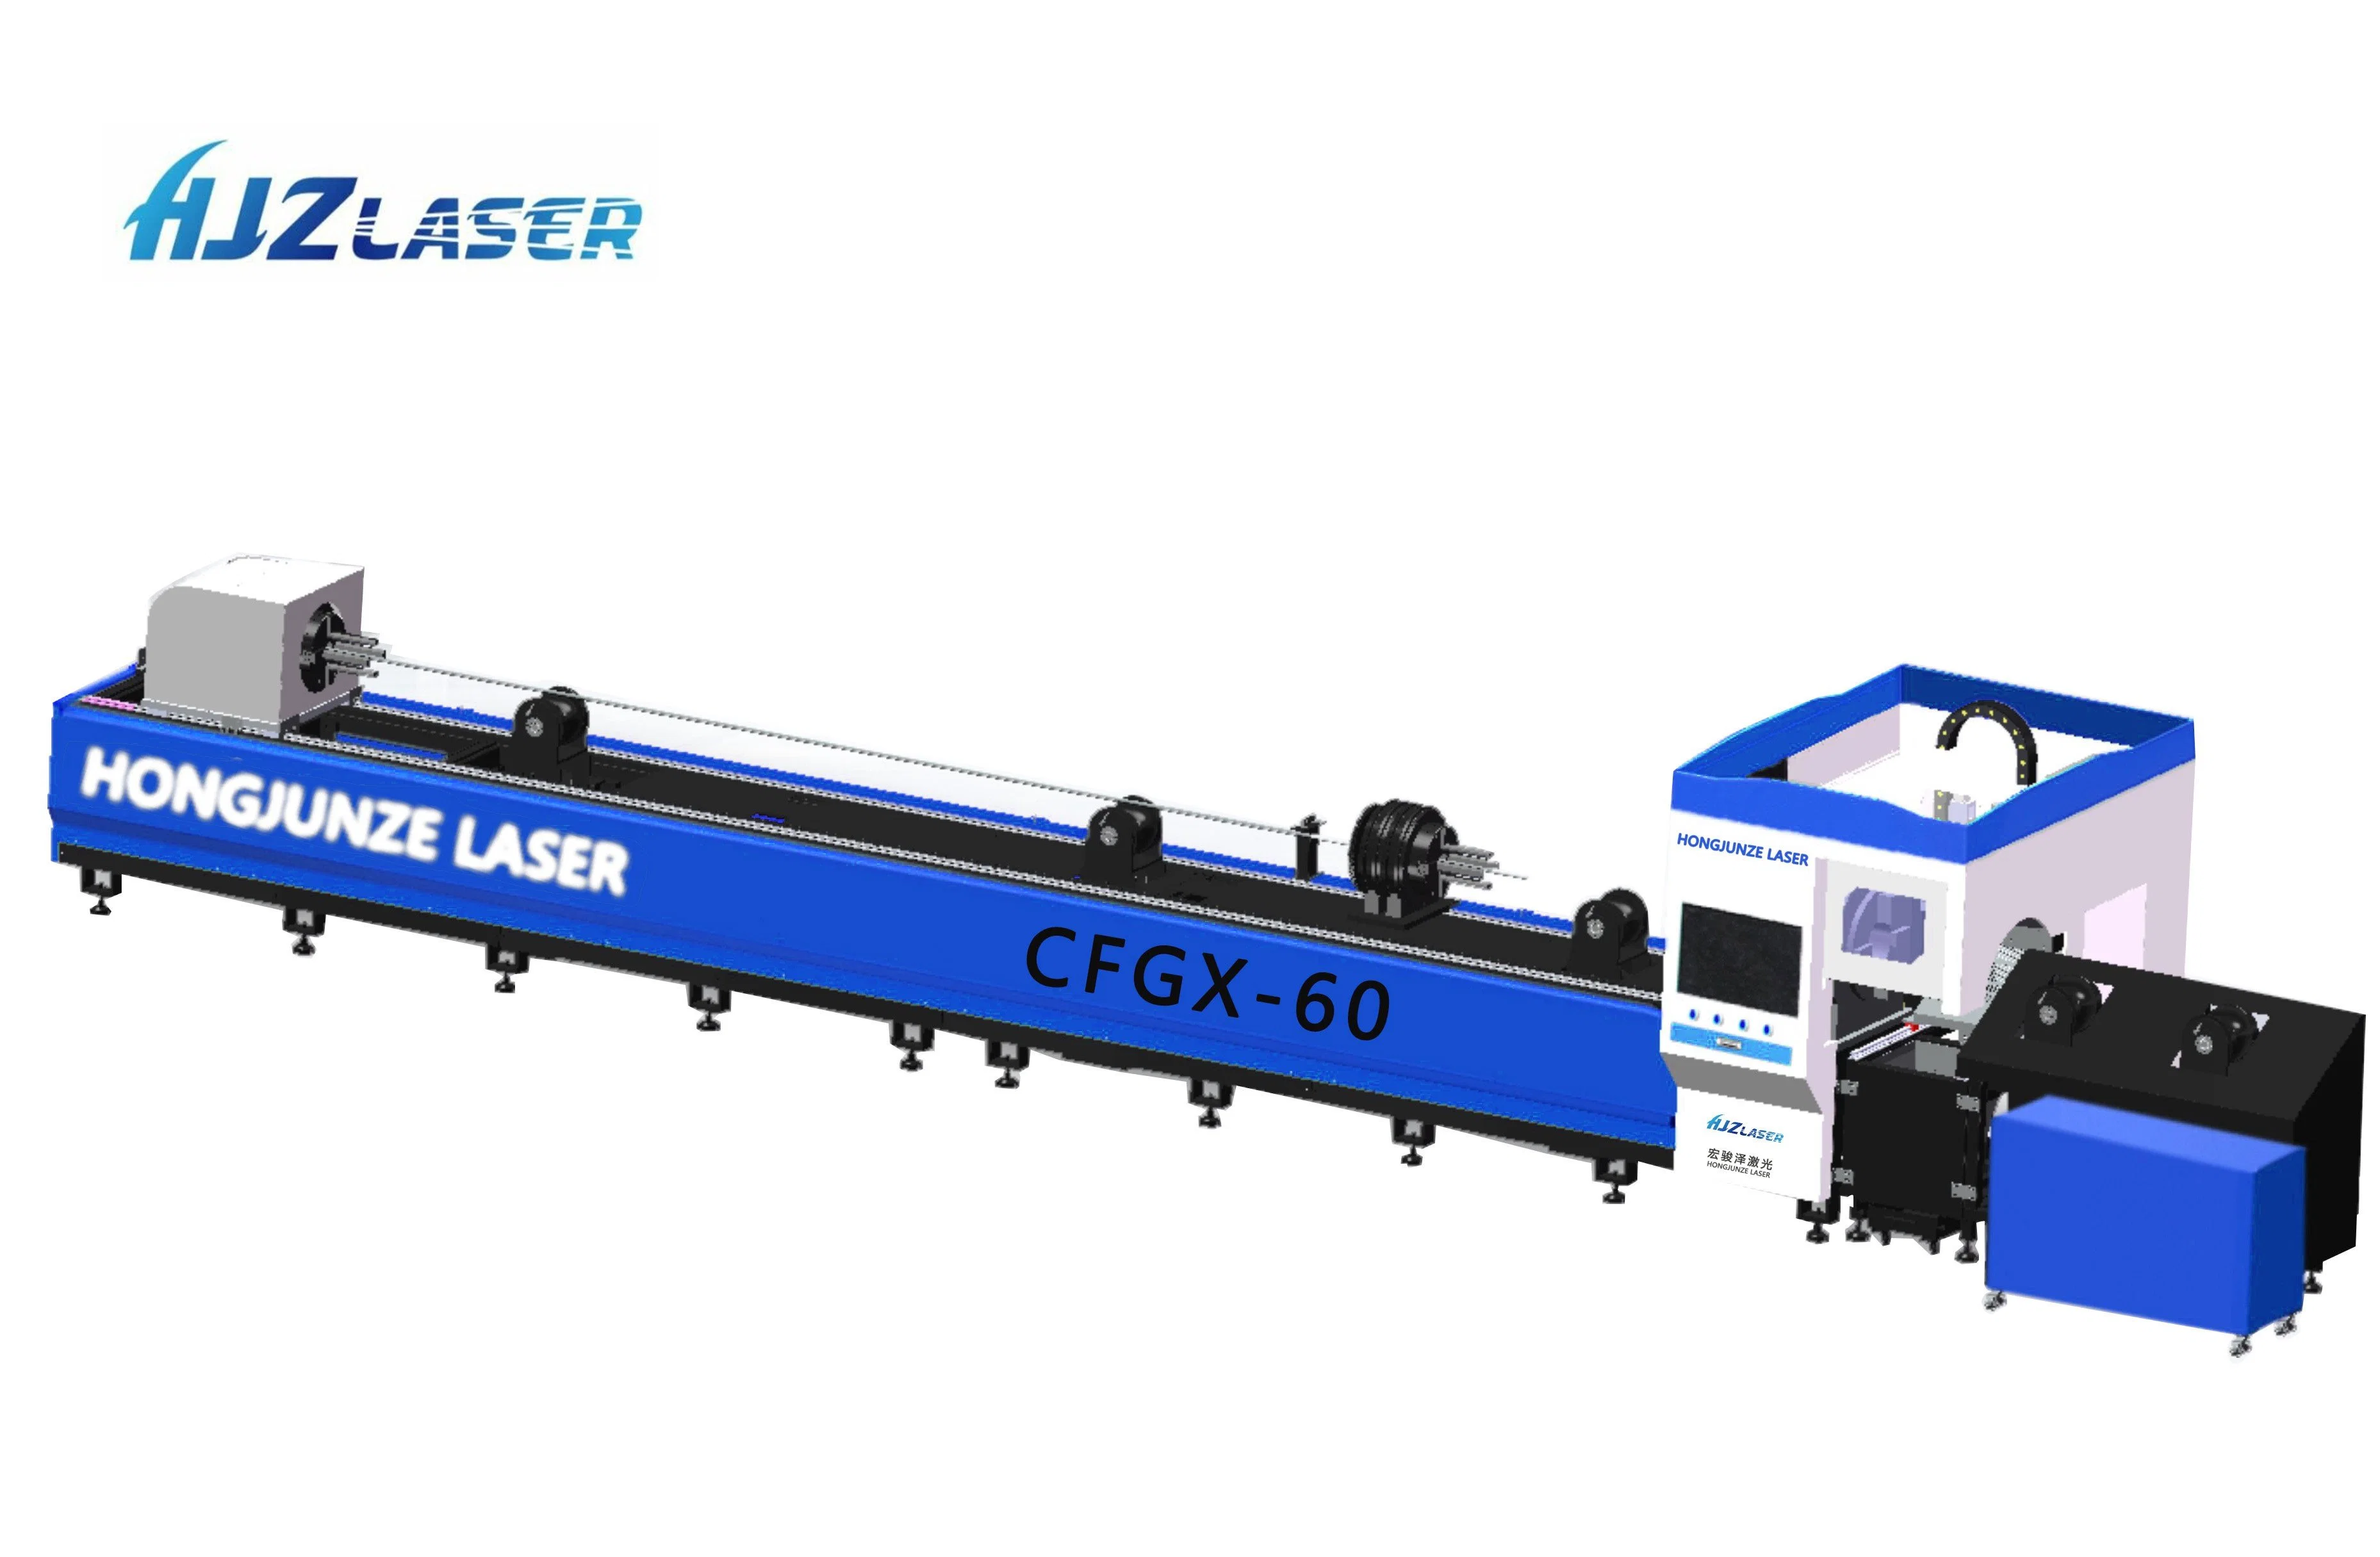 Original Factory Fiber Laser Cutting Machine for Tube Square and Round Metal Pipe with Raycus 1500W Laser Source